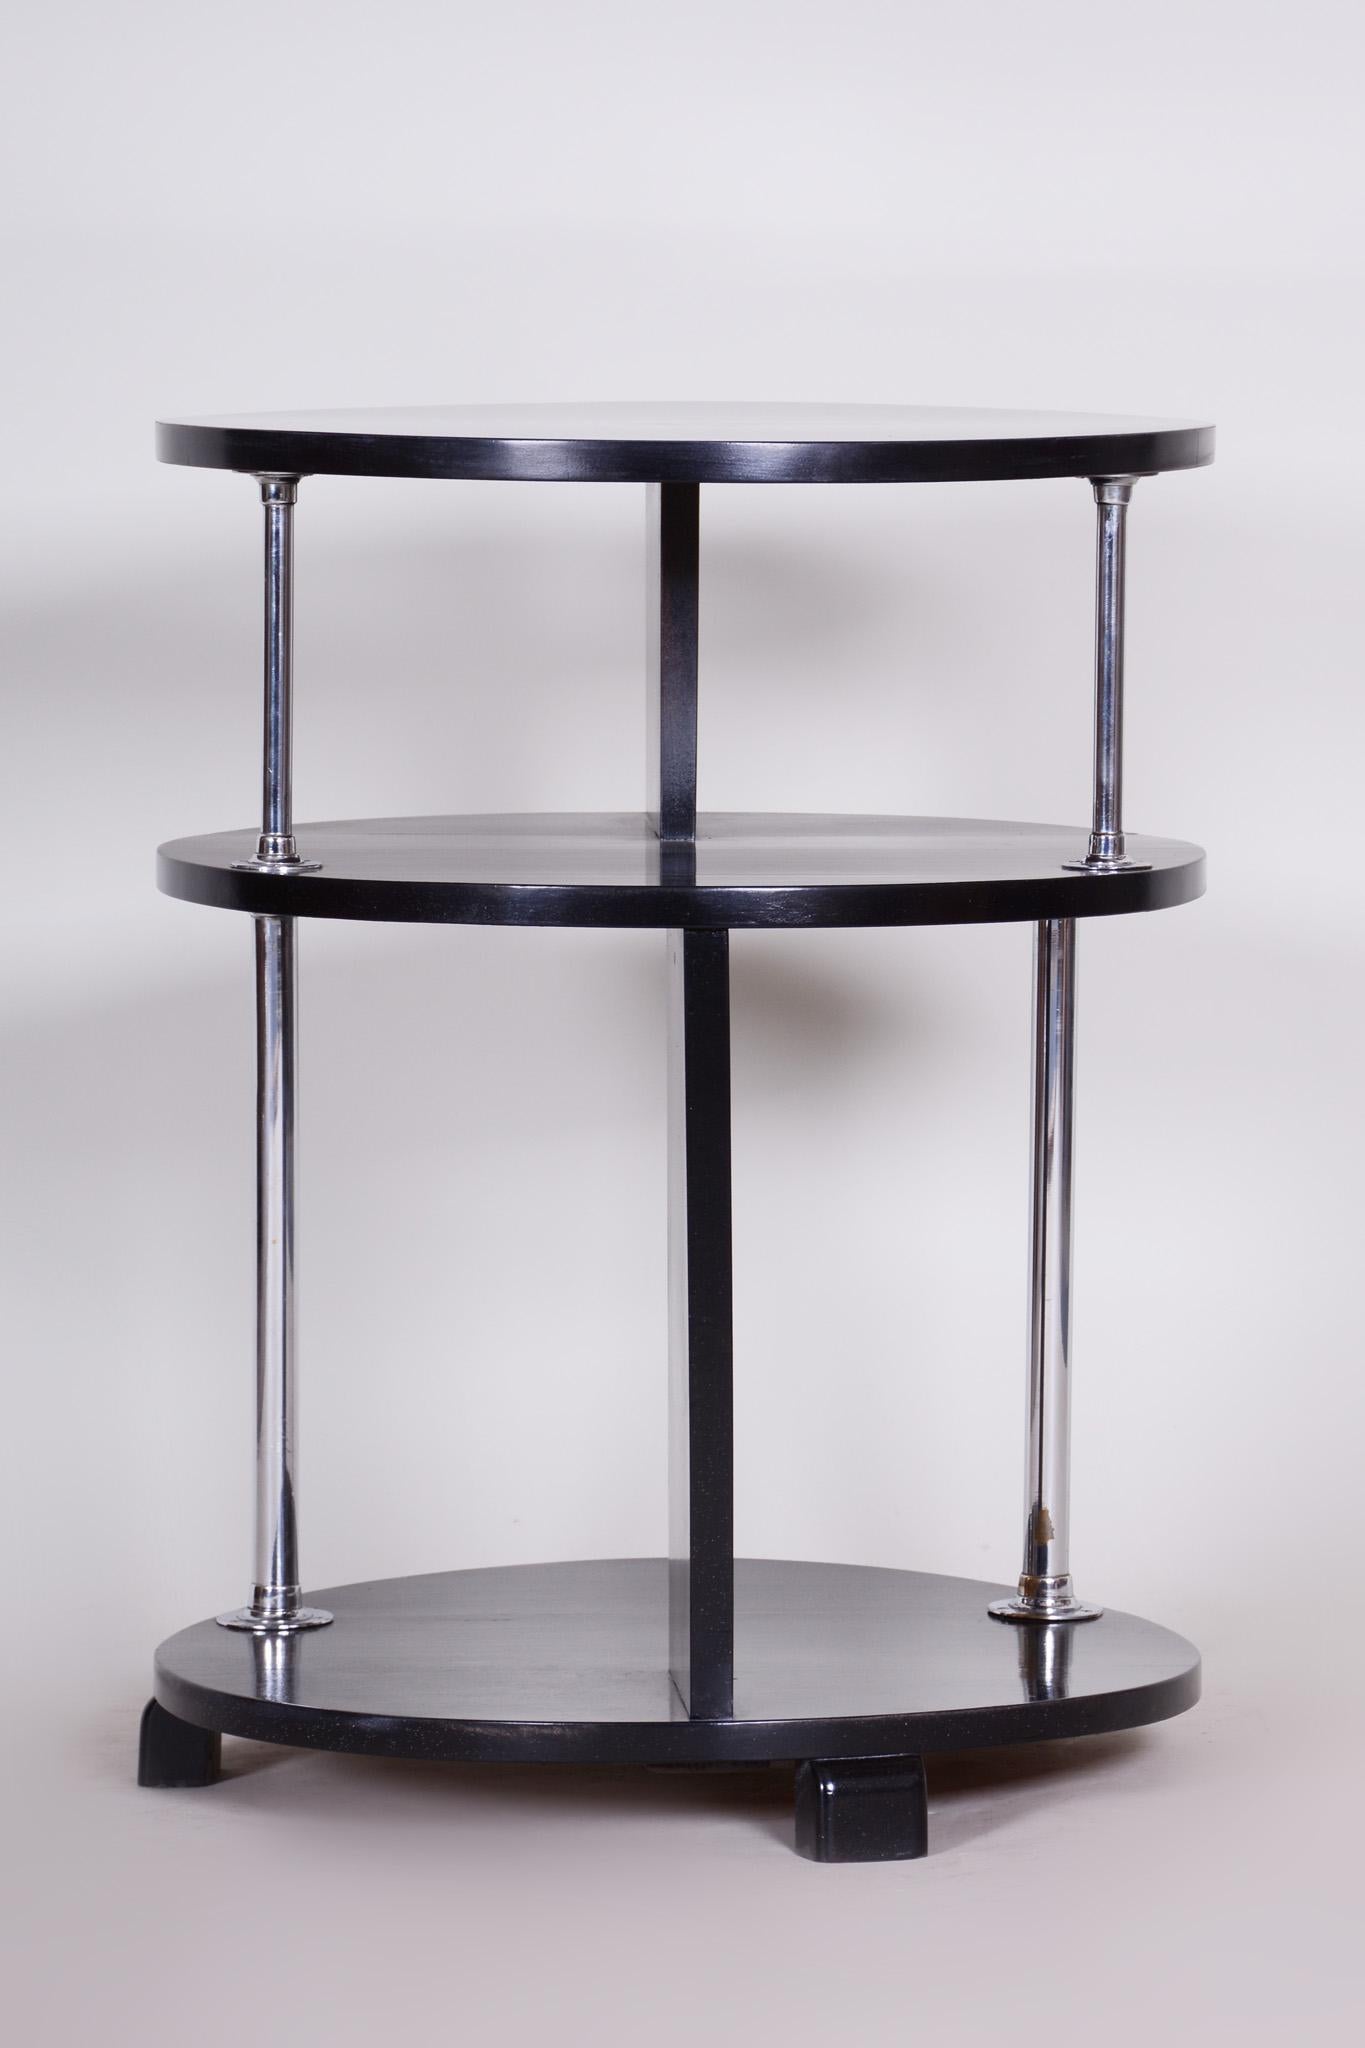 Unusual Small Czech Restored Round Black Beech Chrome Bauhaus Table, 1930s In Good Condition For Sale In Horomerice, CZ